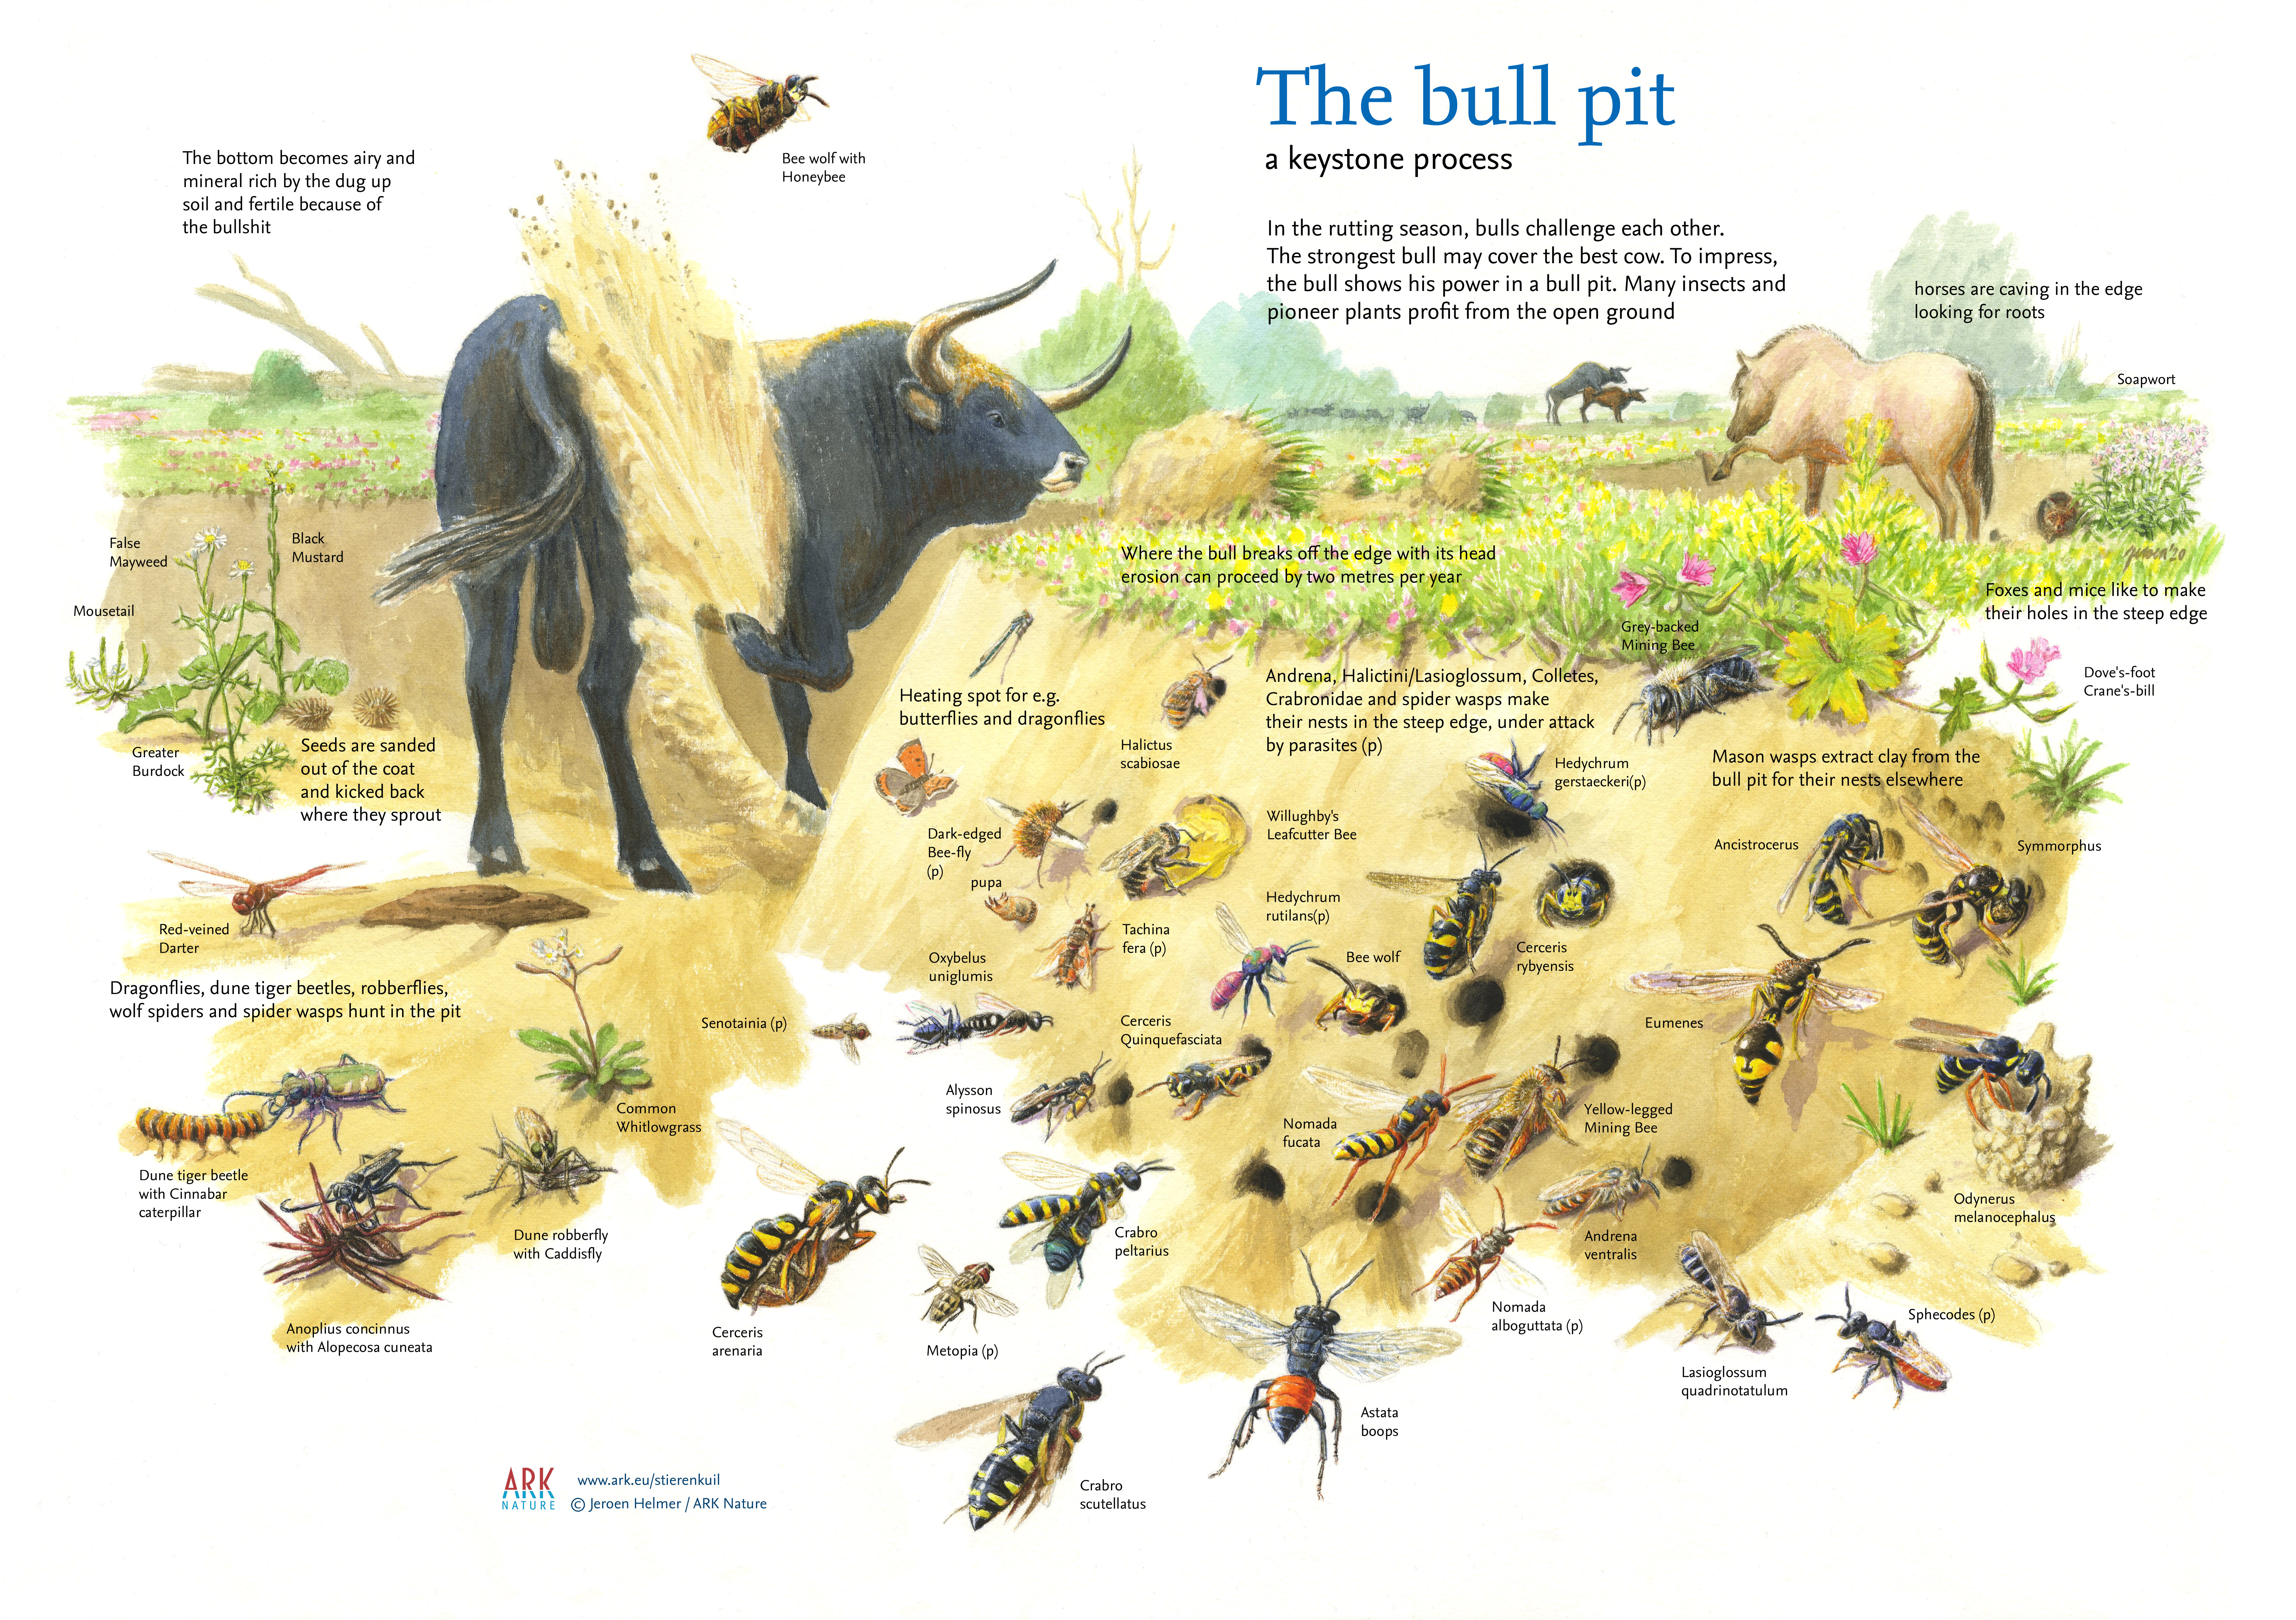 Totally digging it: how bulls provide the opportunity of a lifetime for  pioneer plants and insects | GrazeLIFE